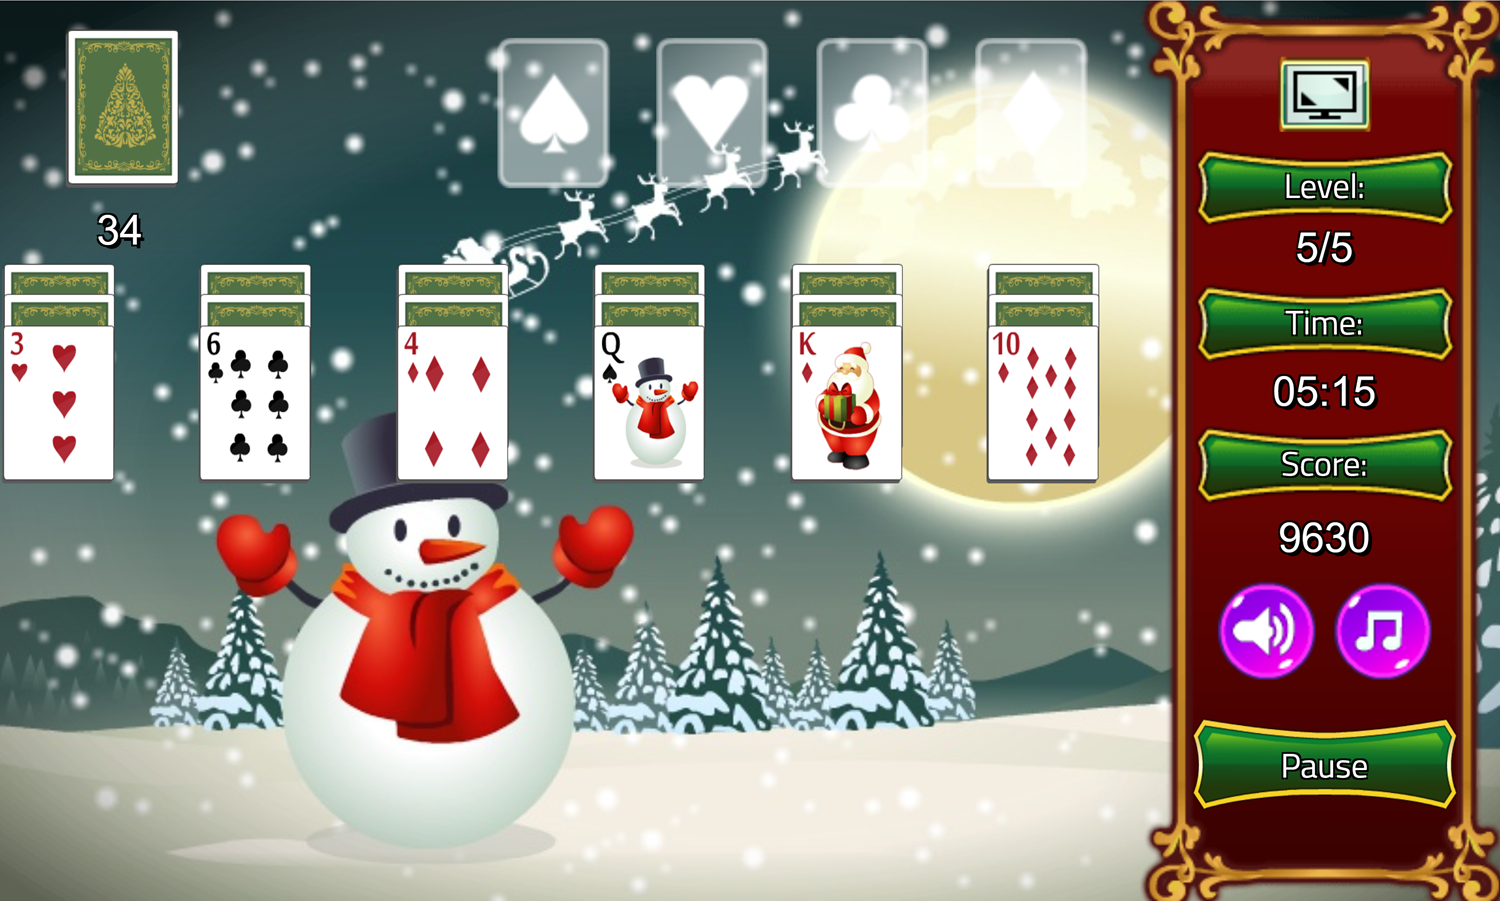 Christmas Solitaire Game Final Level Screenshot.